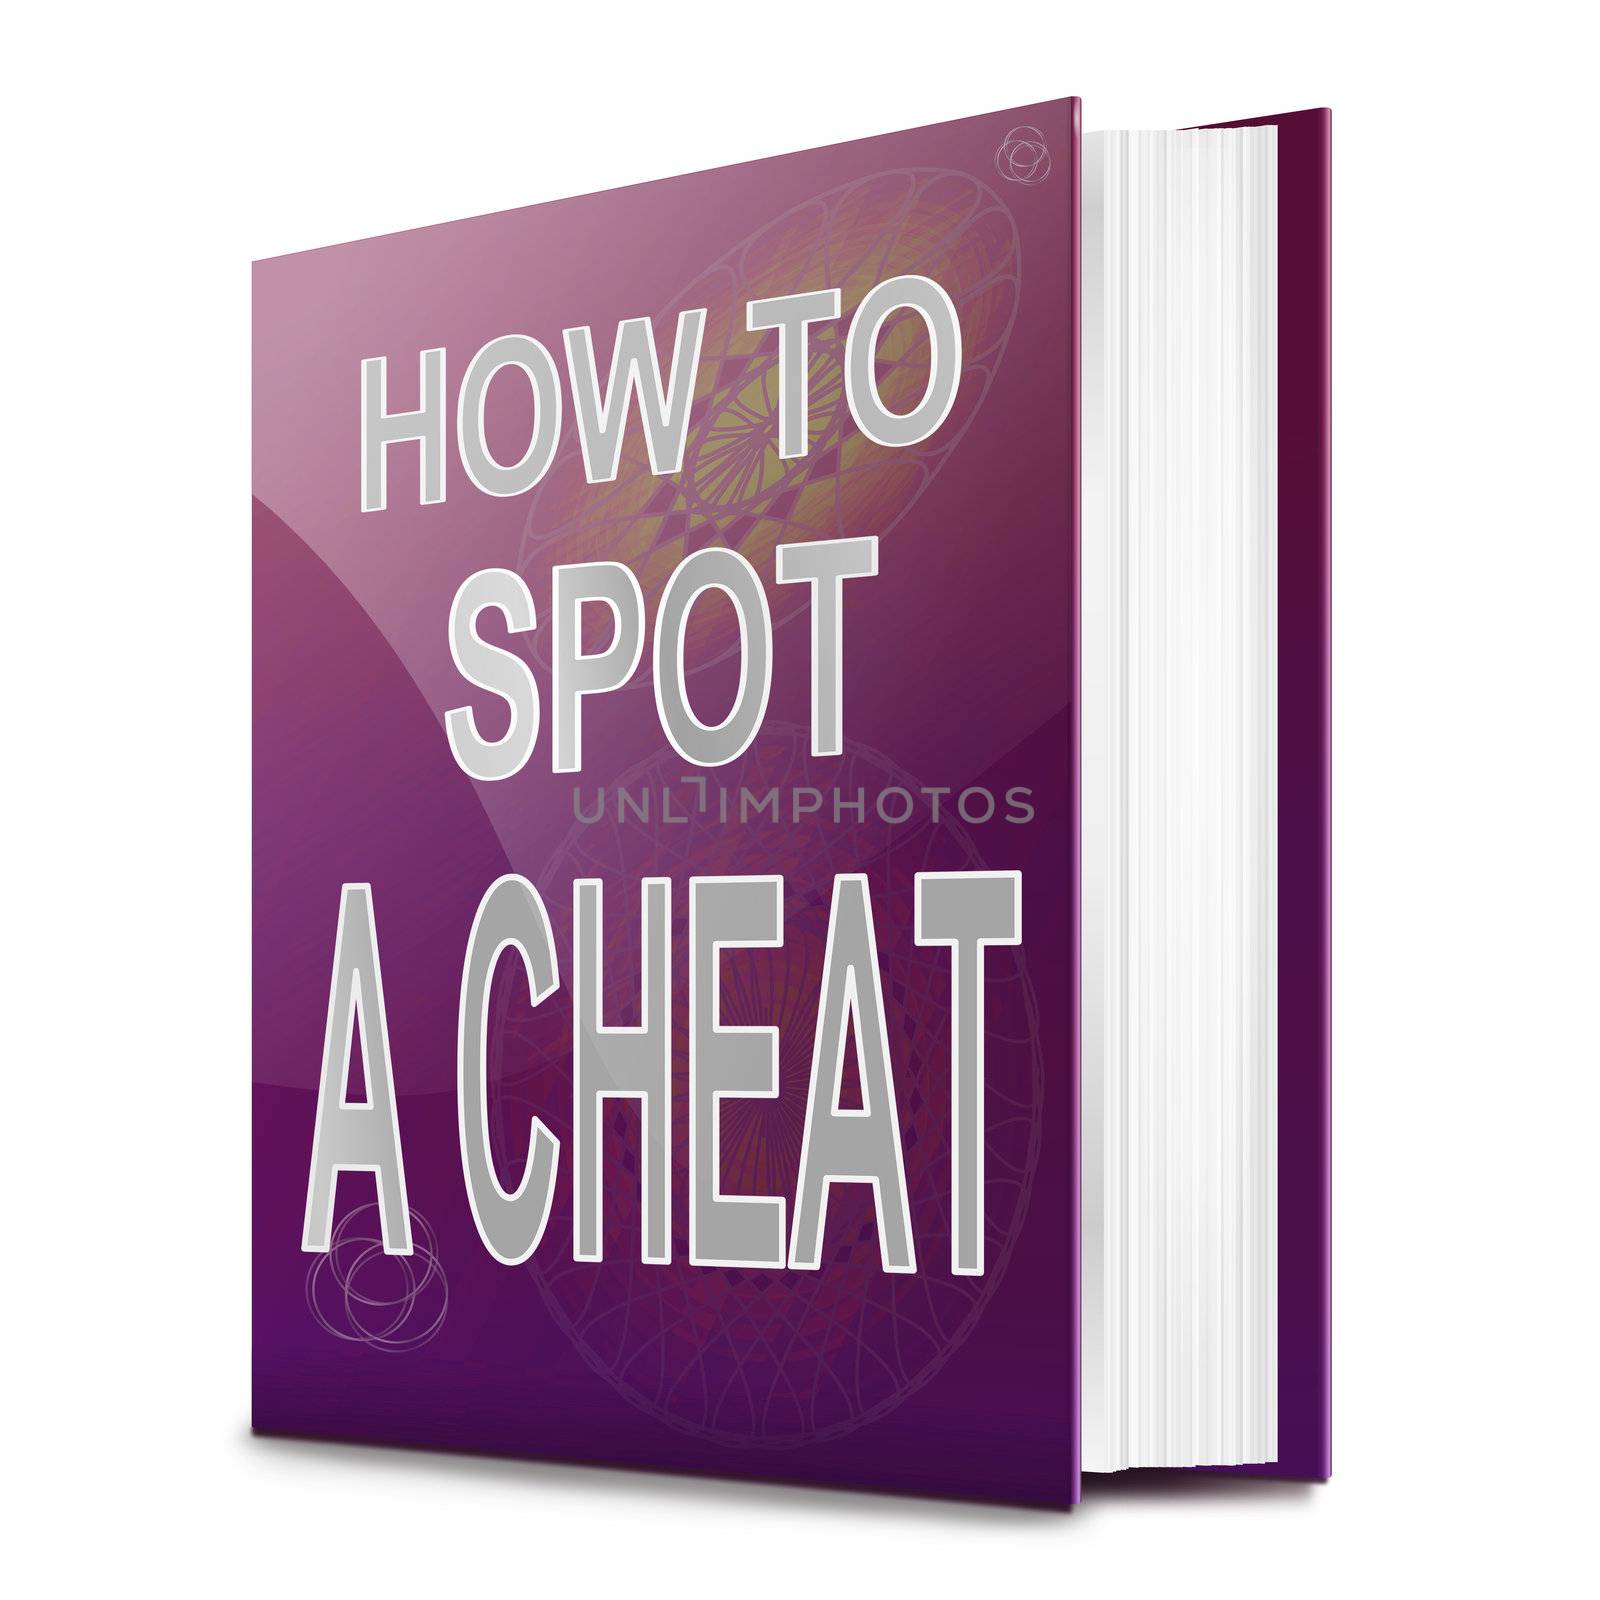 Illustration depicting a text book with a cheating concept title. White background.